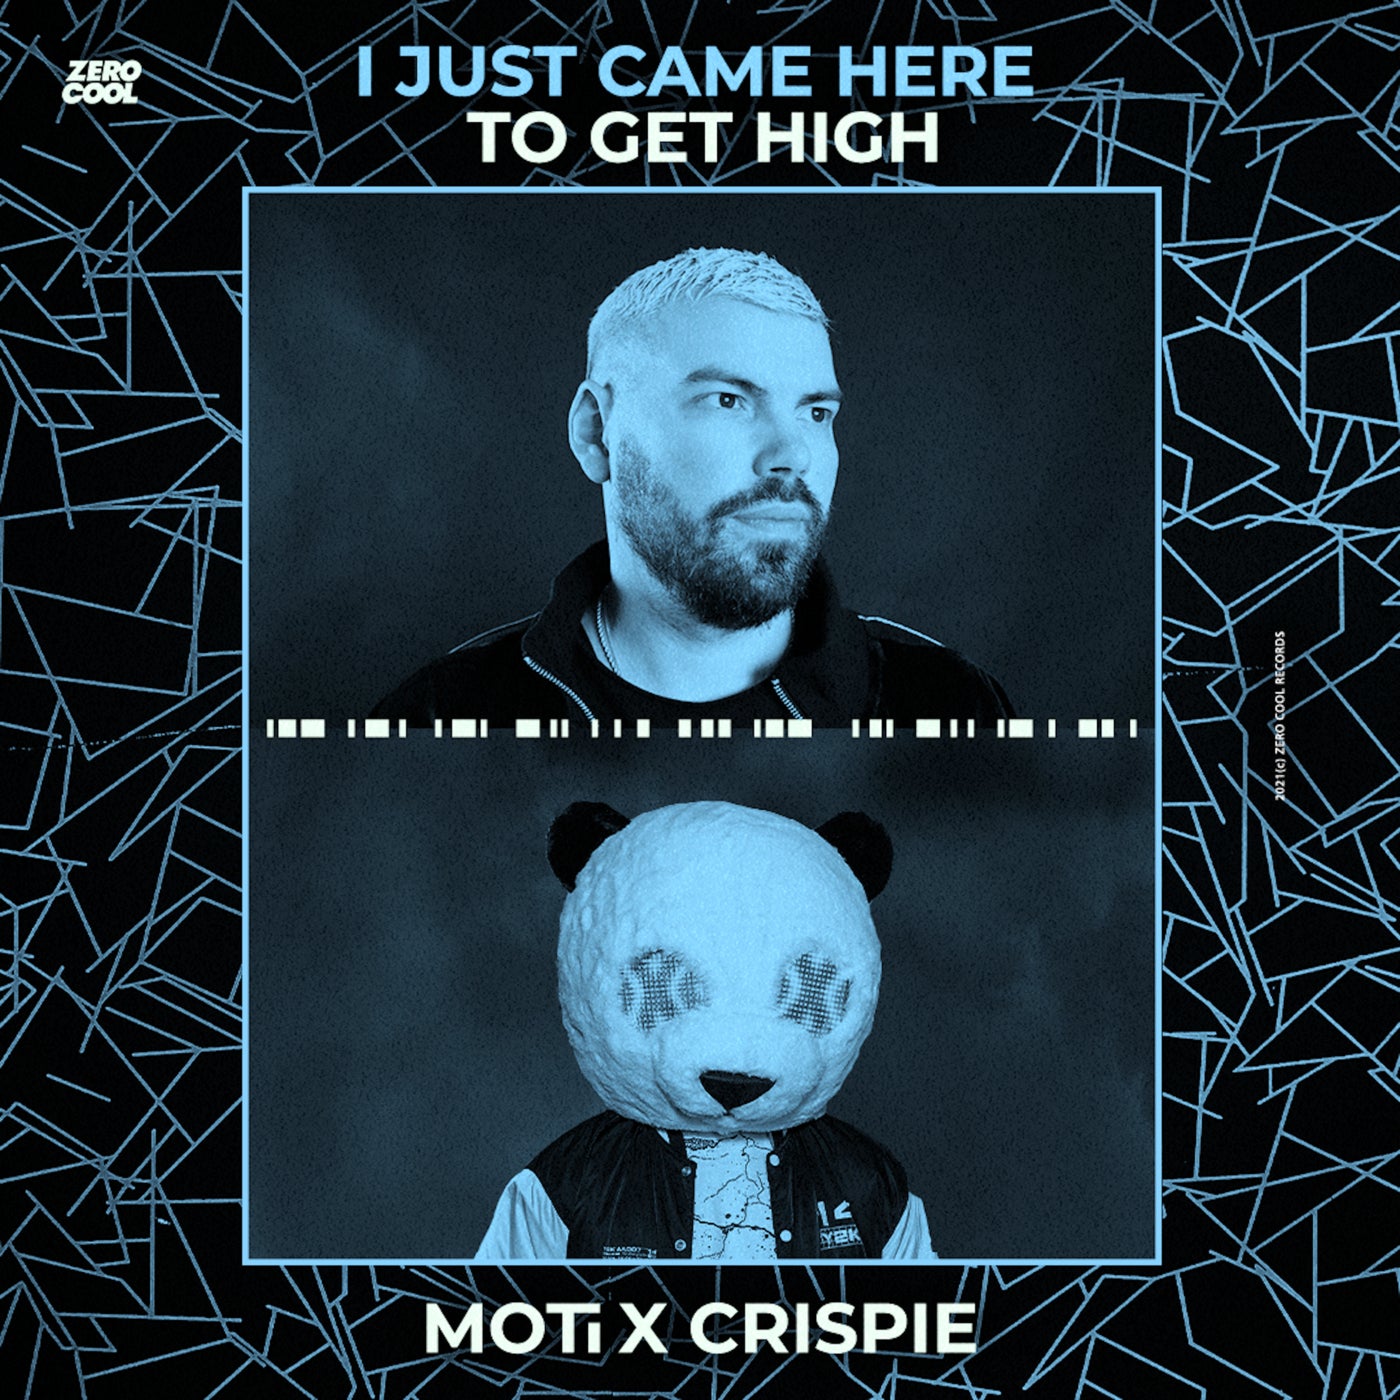 MOTi x CRISPIE - I Just Came Here To Get High [840167587088]